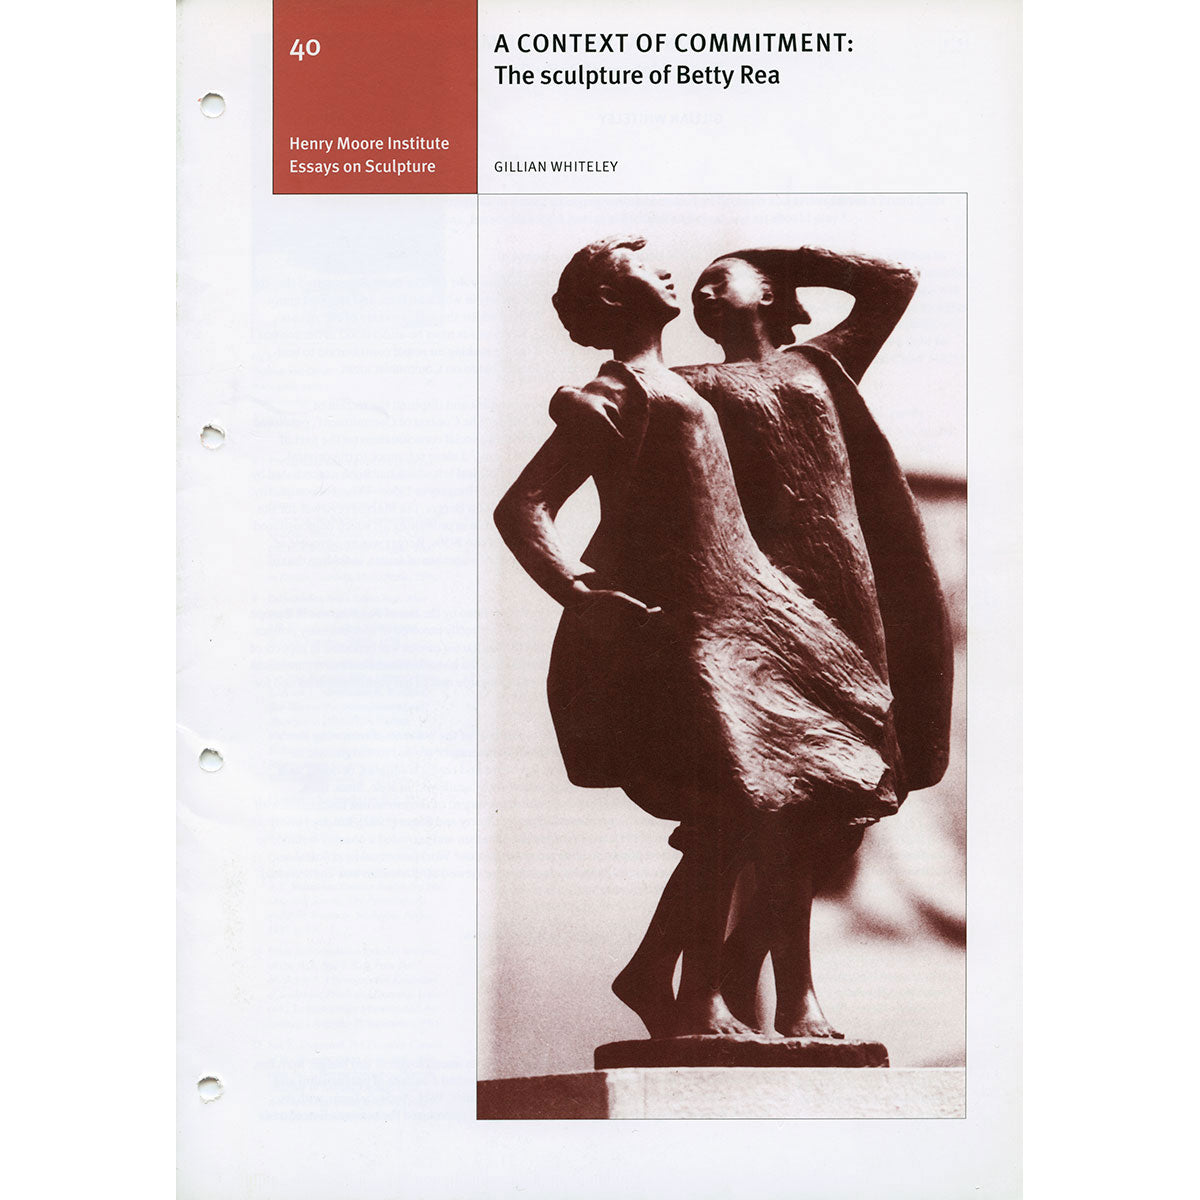 A Context of Commitment: The Sculpture of Betty Rea (No. 40)